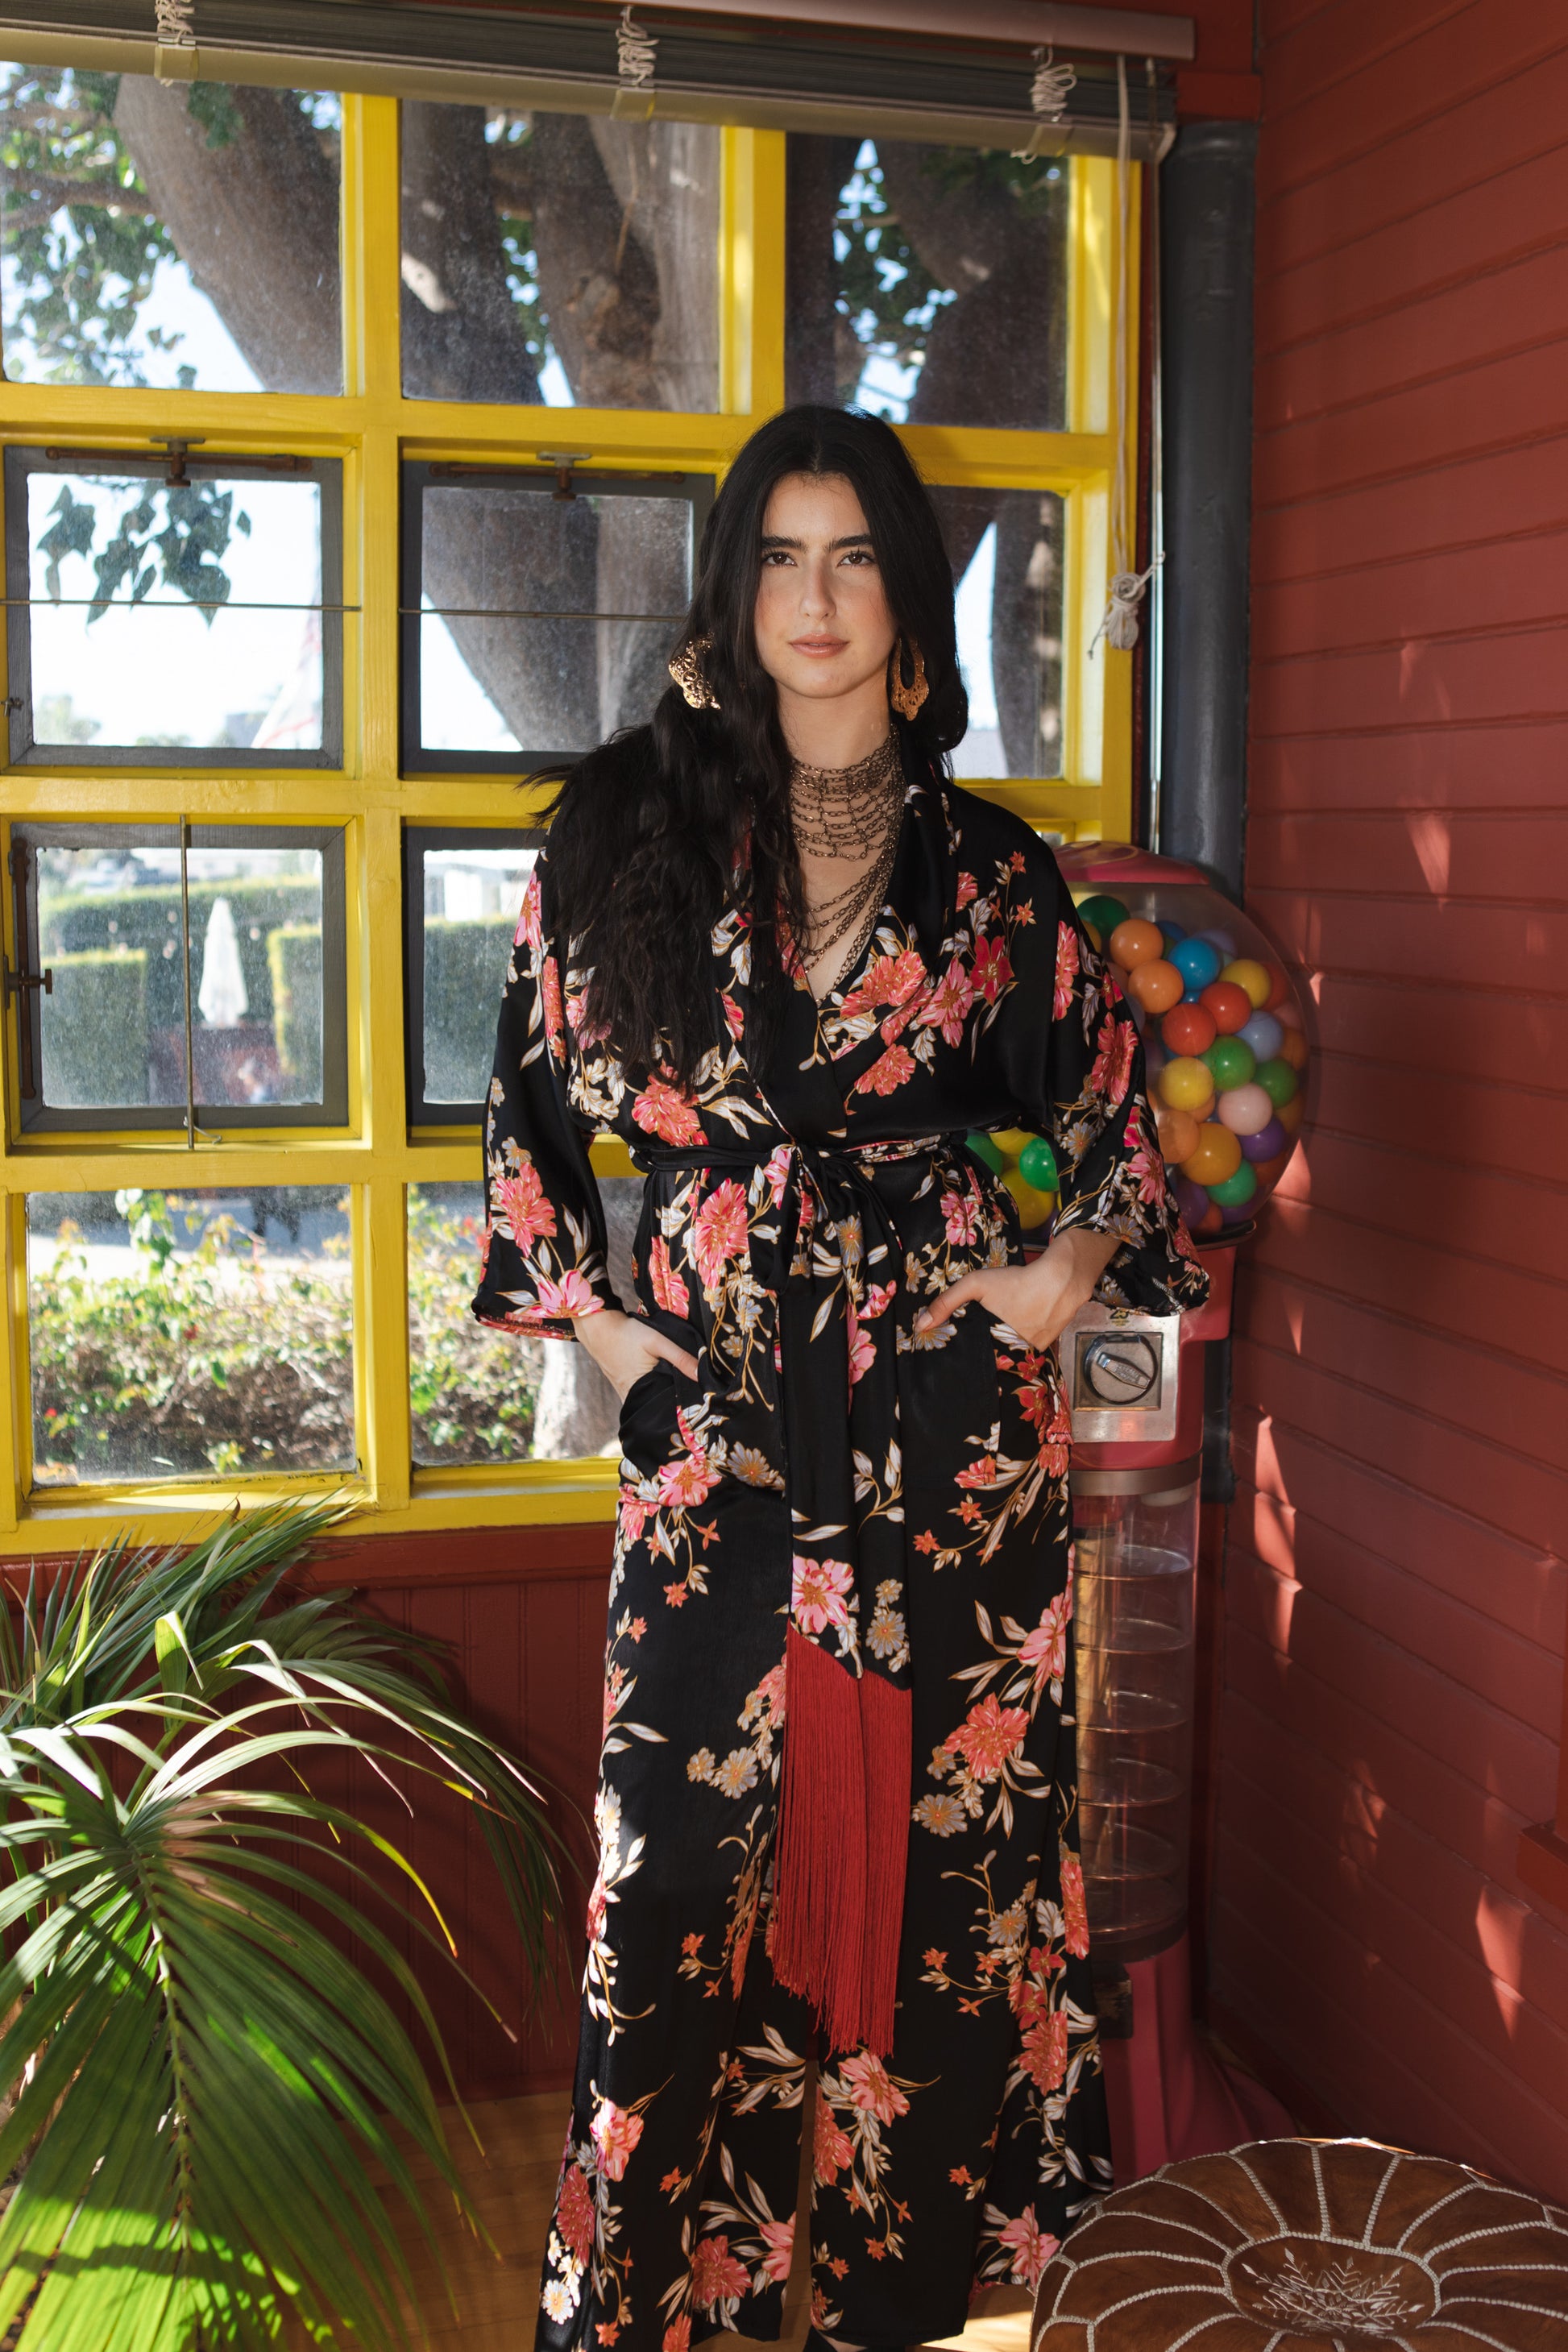 jennafer grace Harlowe dolman palazzo set silky black georgette with vibrant pink red orange floral print matching co-ord coord set wrap blouse top with tasseled belt and palazzo pant with pockets and elastic waist boho bohemian hippie romantic whimsical glamorous pajamas pjs glam lounge wear handmade in california usa